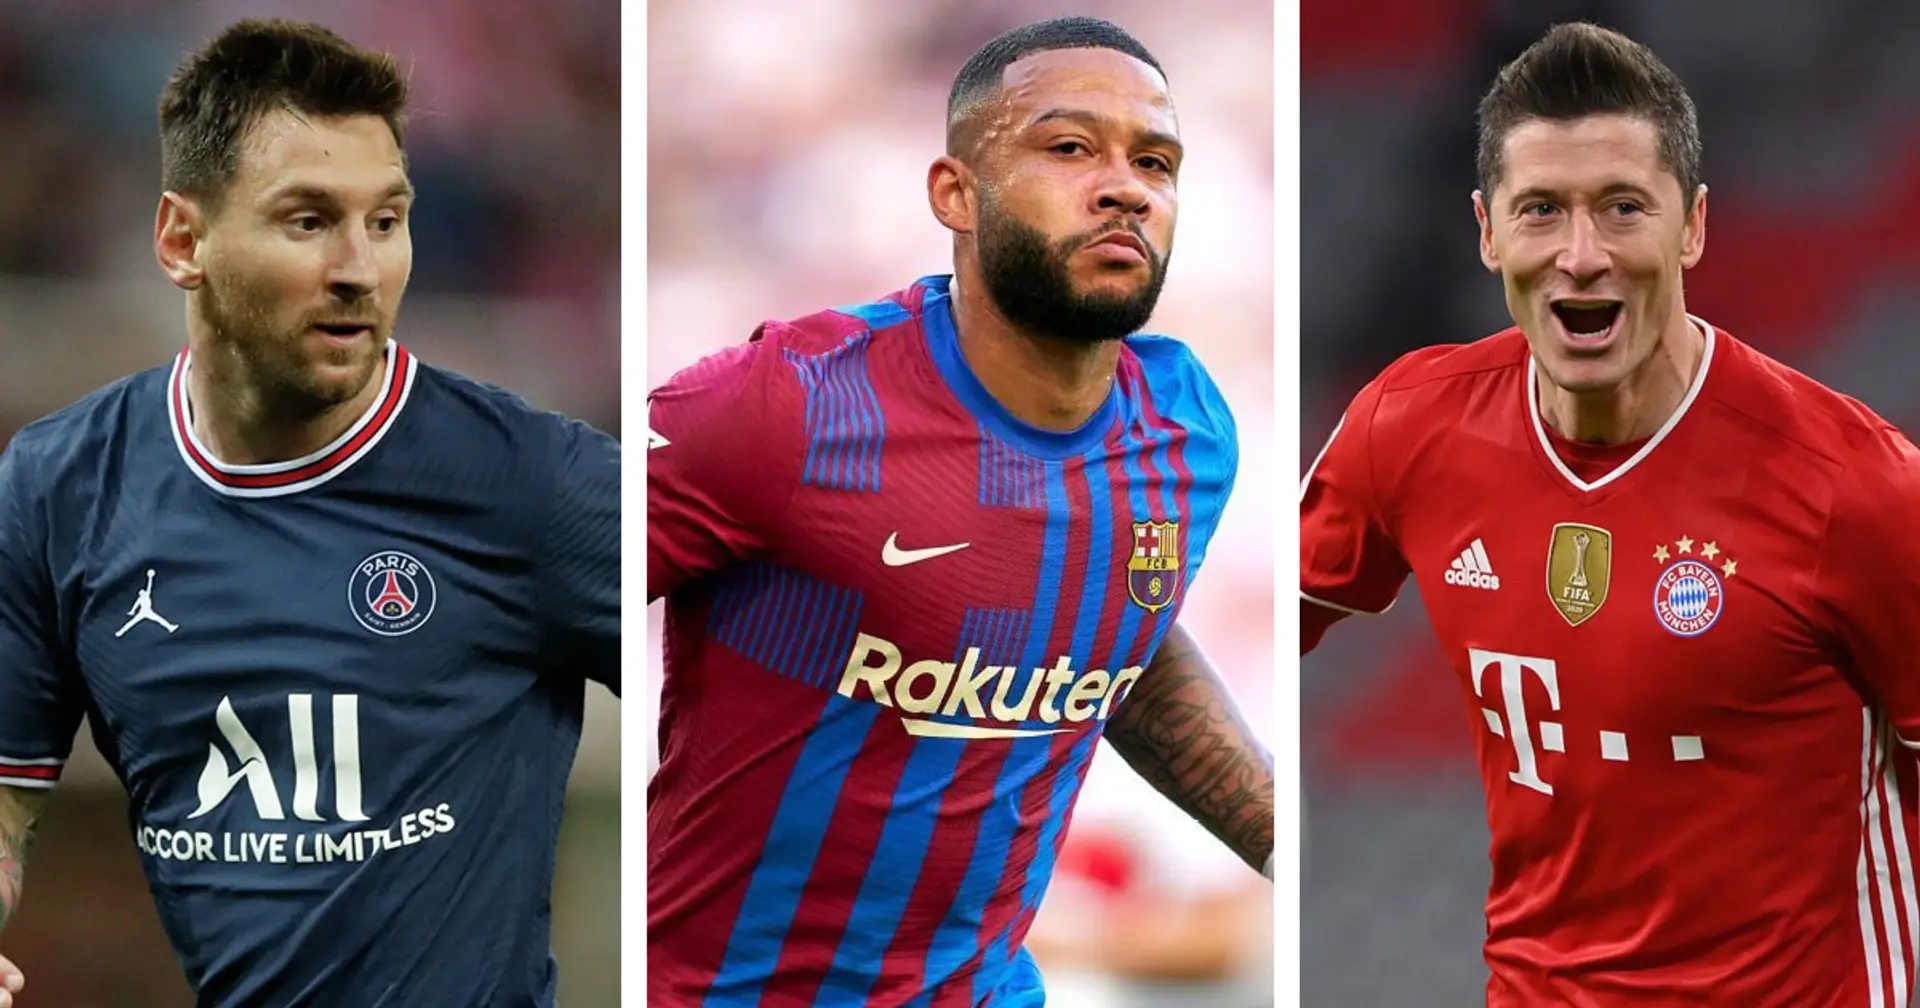 Memphis Depay among top 5 players with most goal contributions in 2021